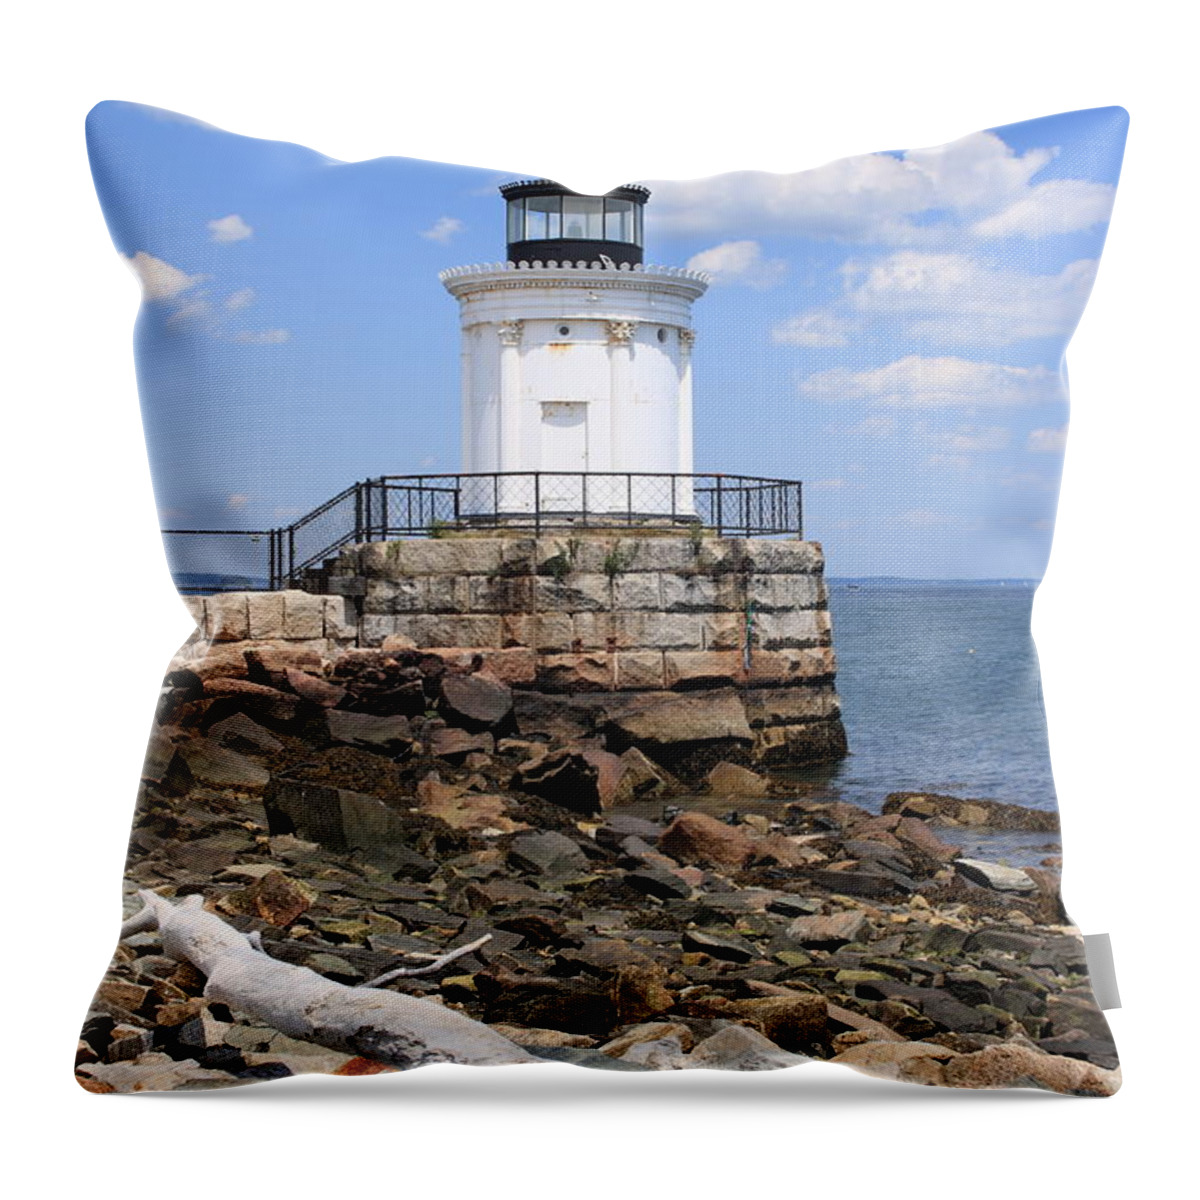 Seascape Throw Pillow featuring the photograph Bug Lighthouse by Doug Mills